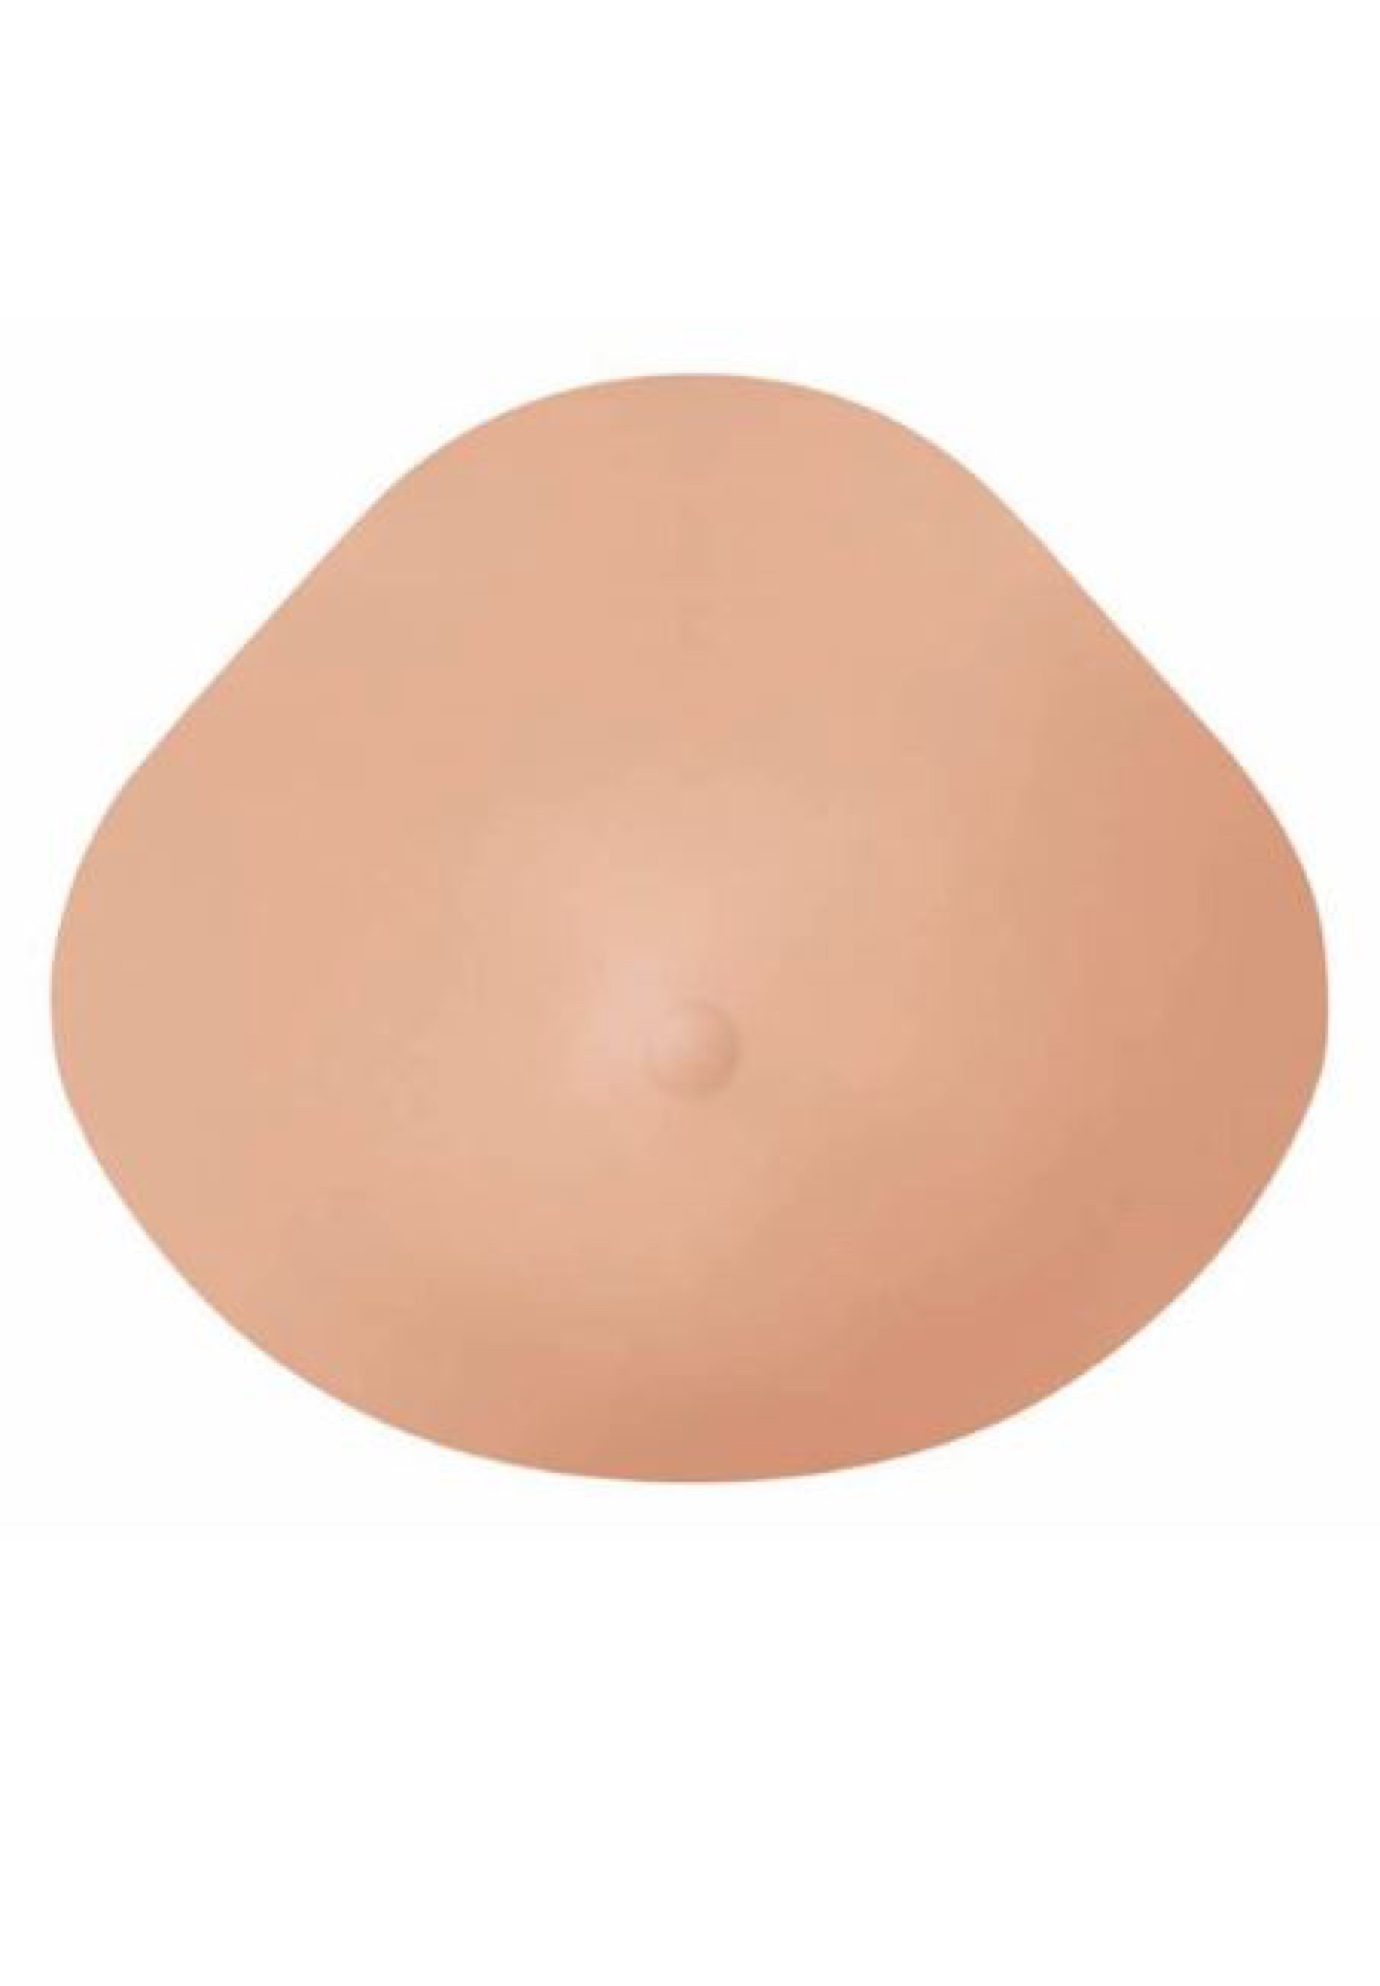 How To Make Breast Forms At Home